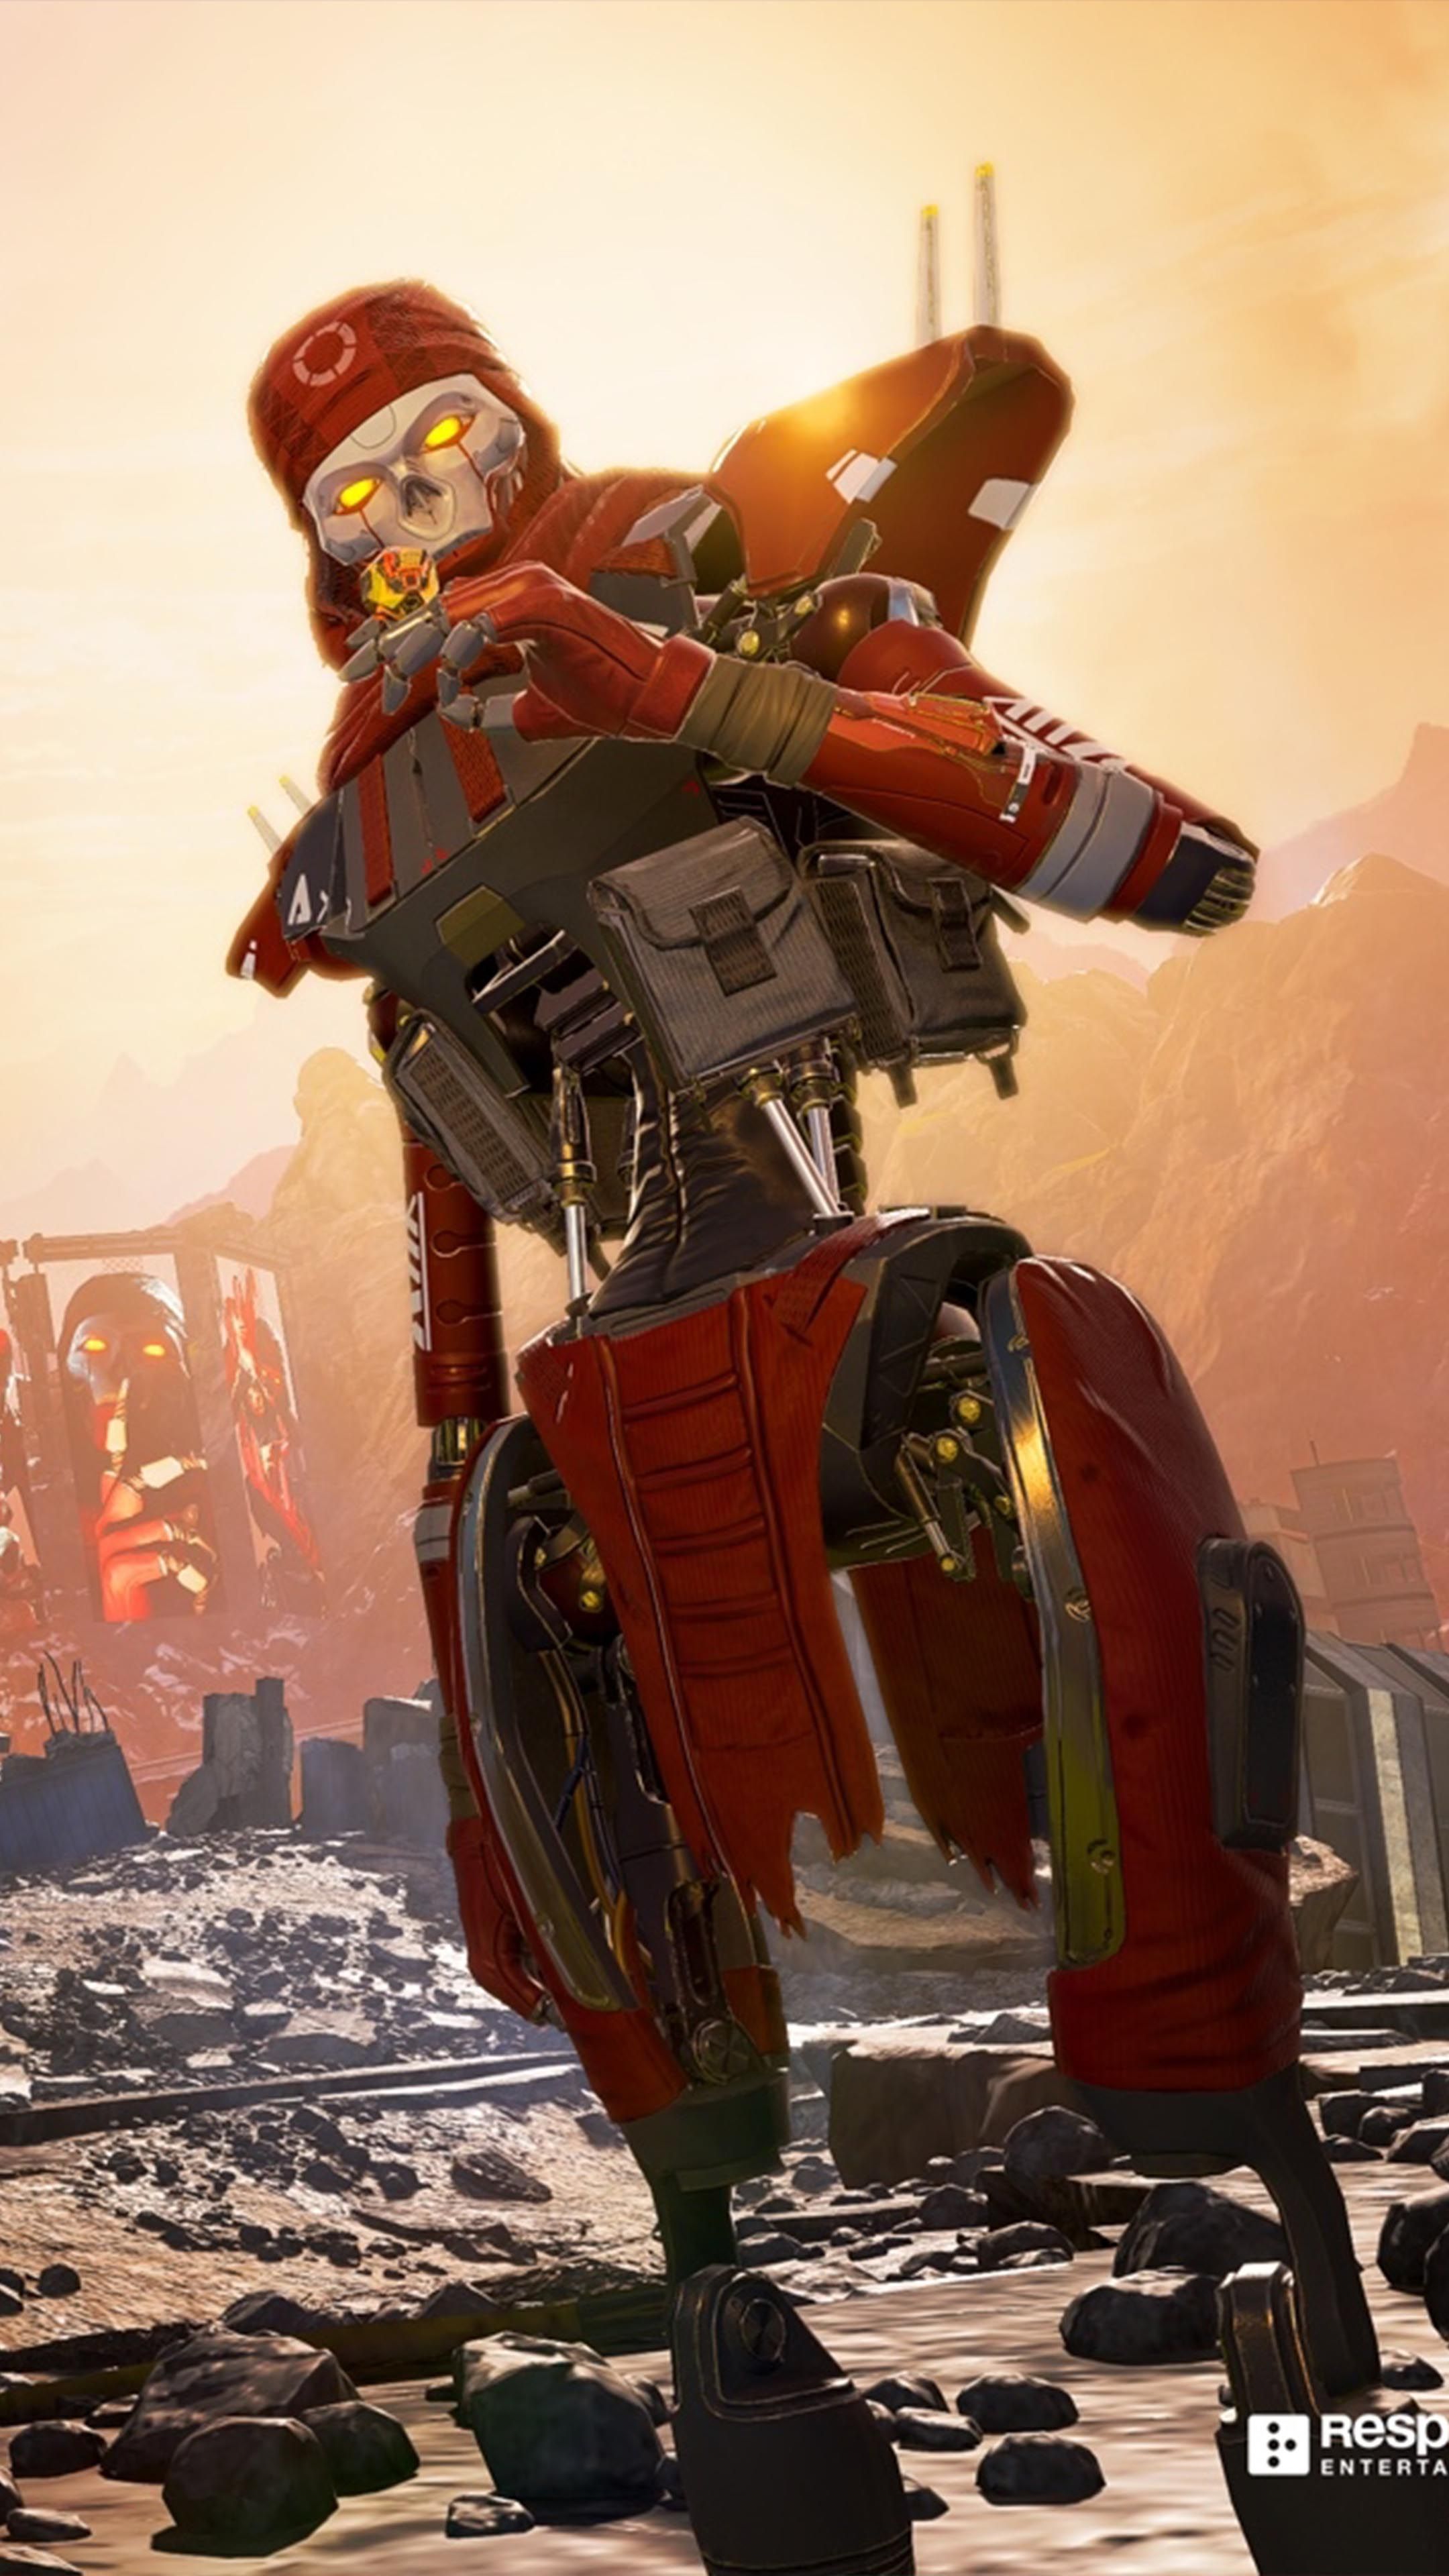 Top 999+ Apex Legends Wallpaper Full HD, 4K✓Free to Use